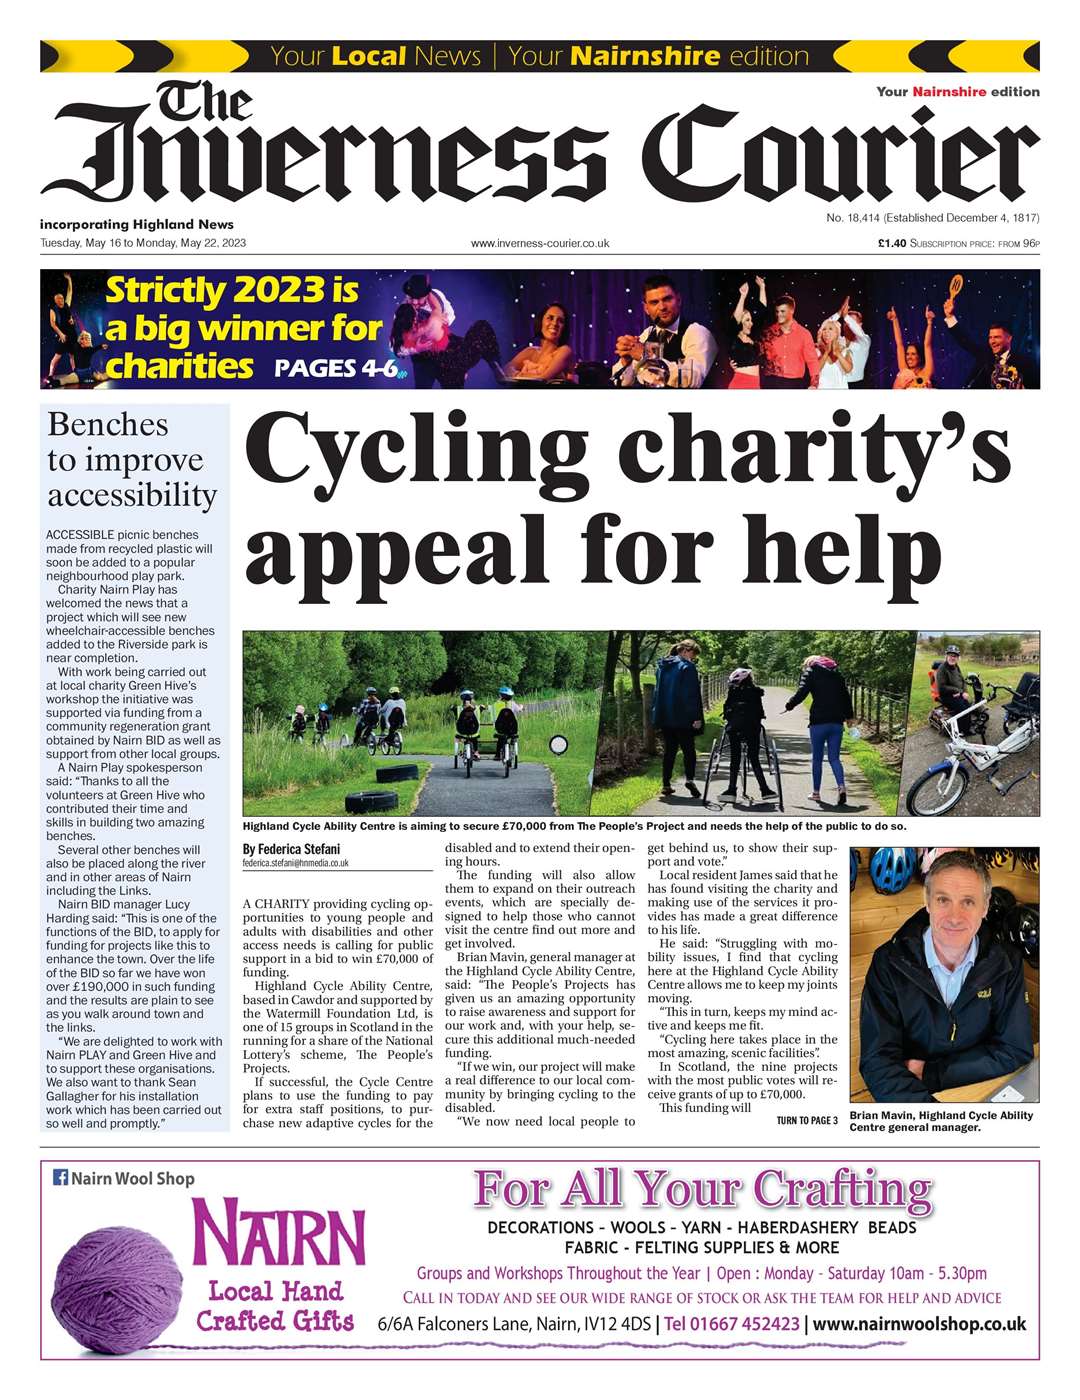 The Inverness Courier (Nairnshire edition), May 16, front page.